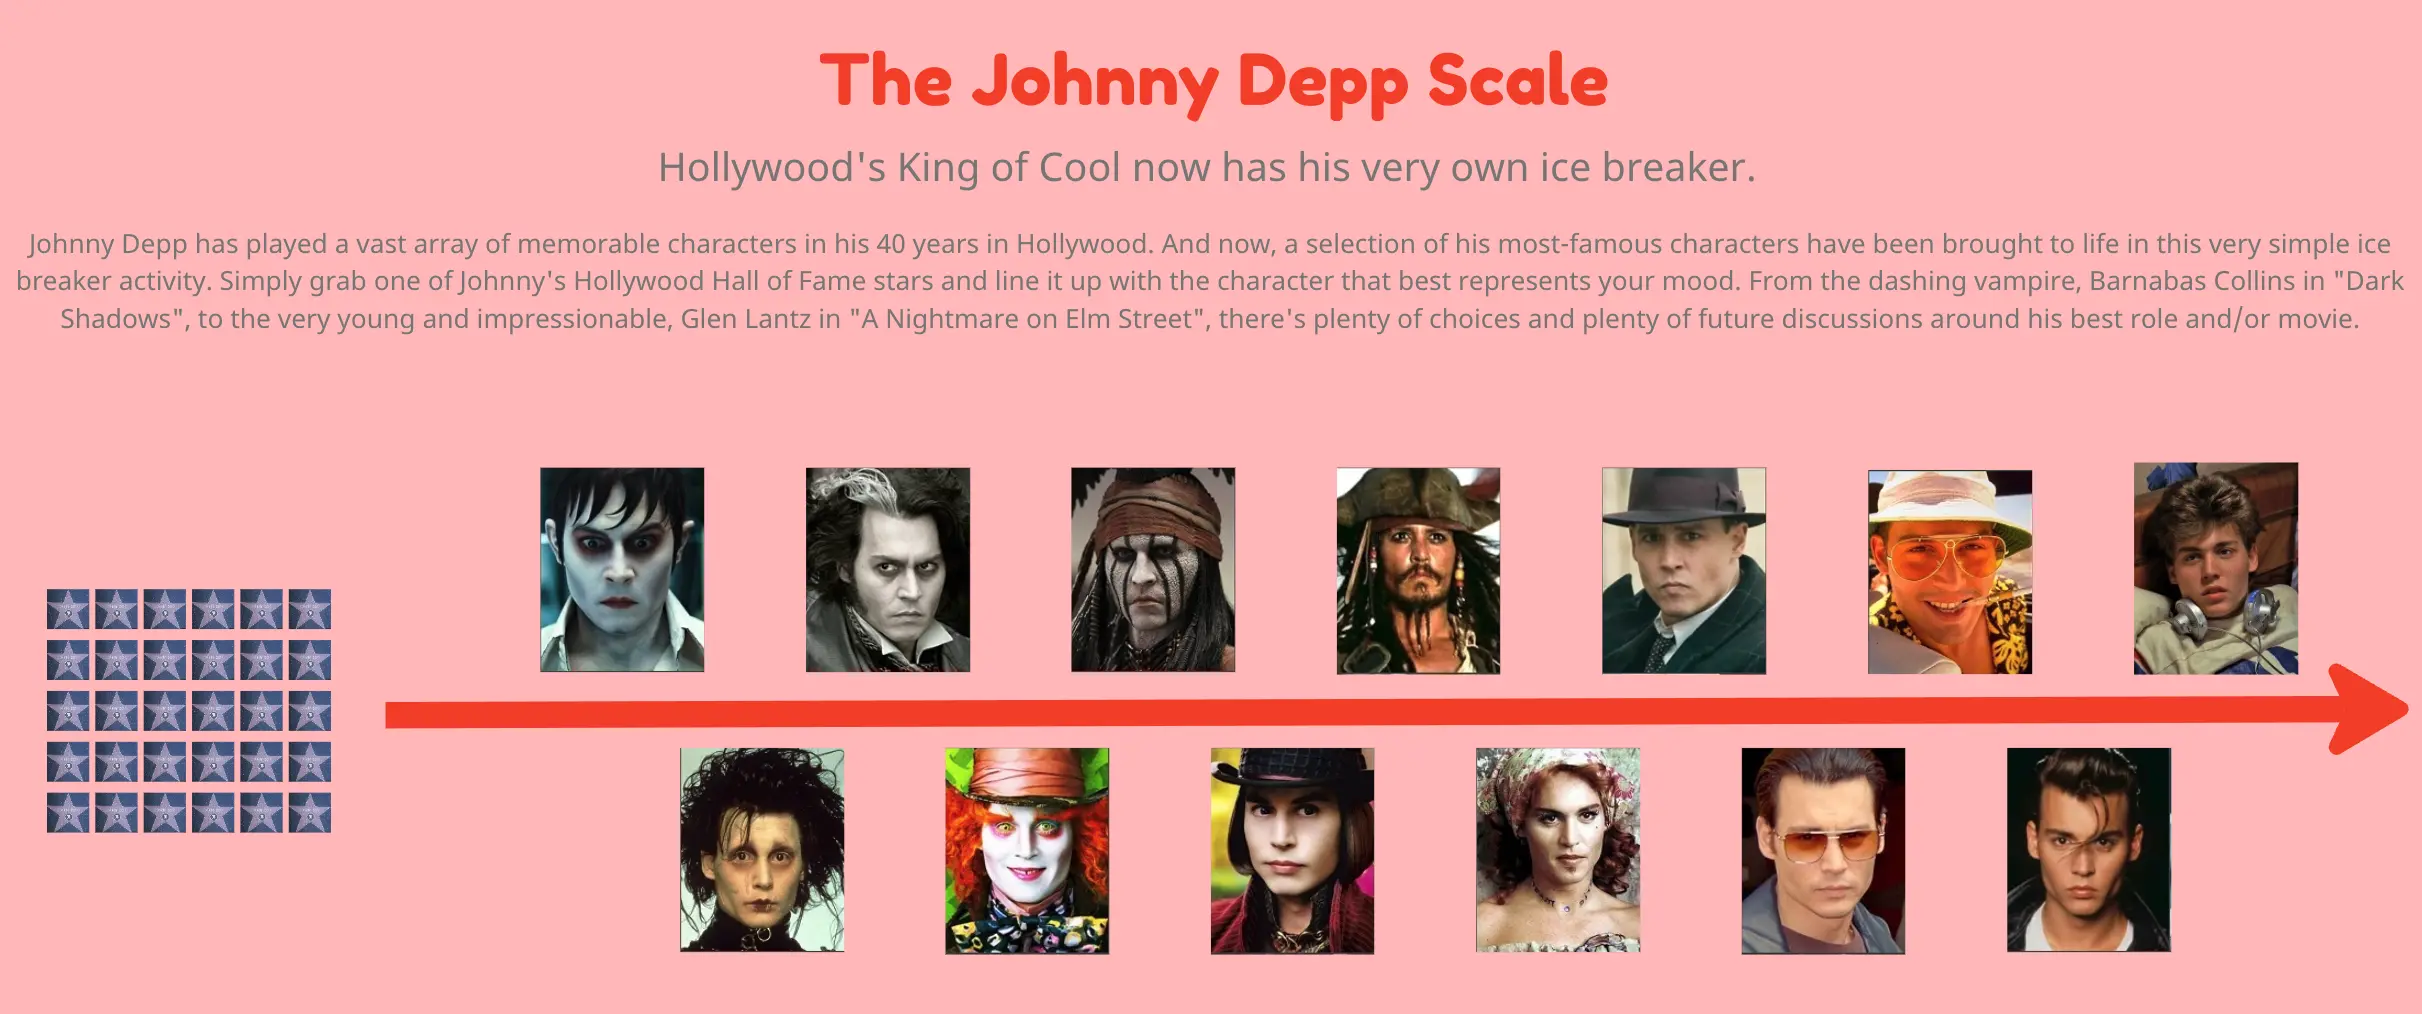 Template cover of The Johnny Depp Scale